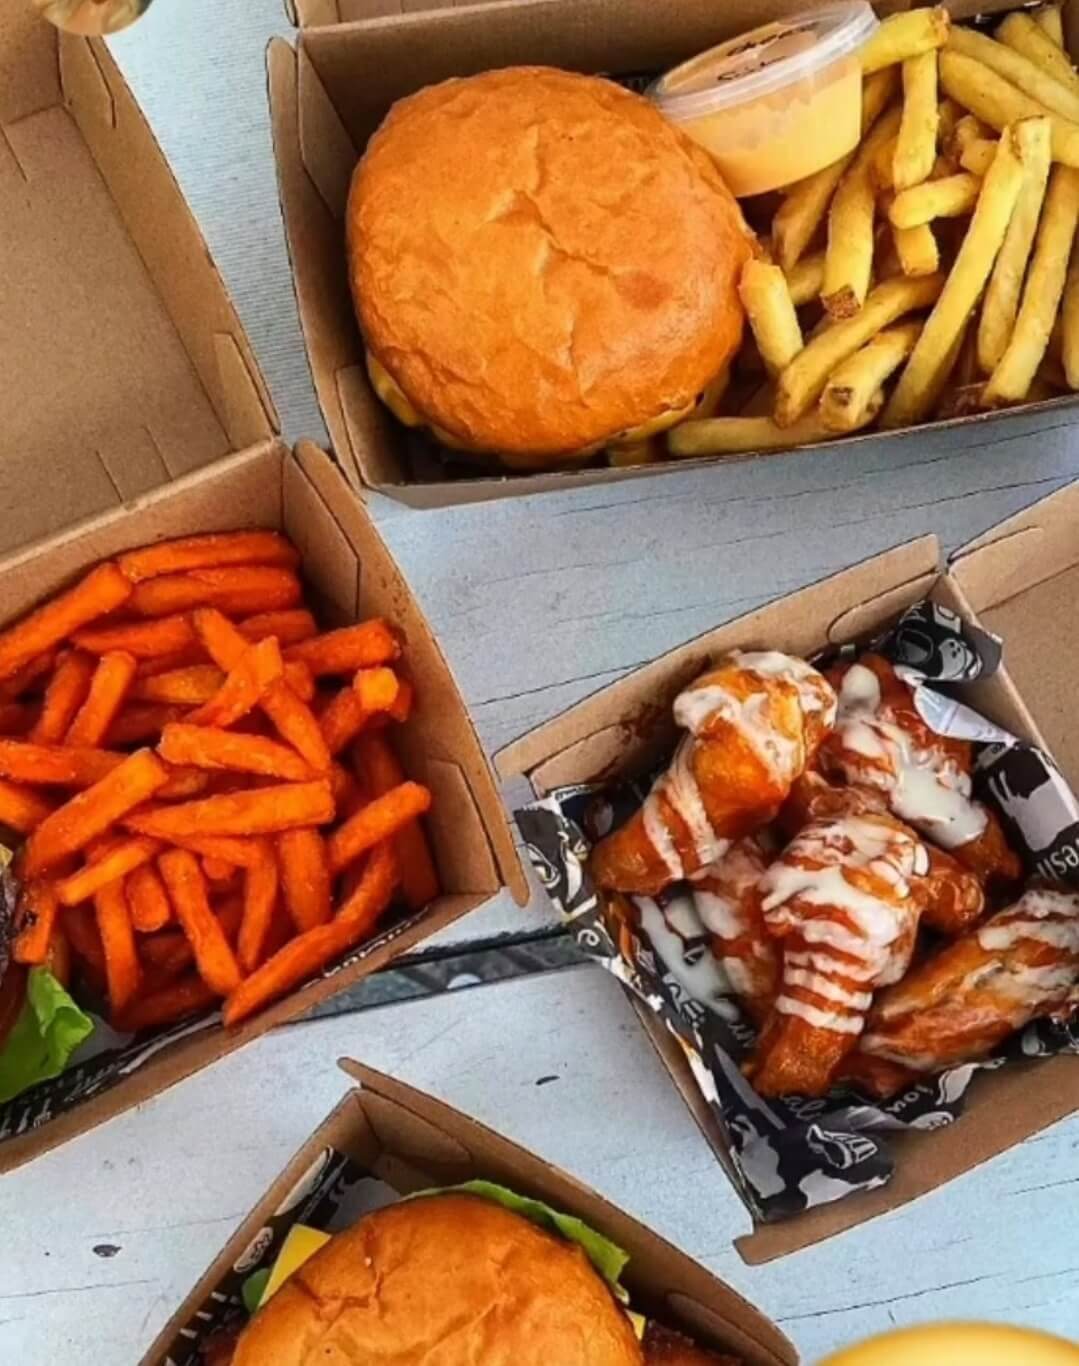 Overhead view of burgers, chips, sweet potato chips, chicken wings with a drizzle of sauce in cardboard recyclable boxes.